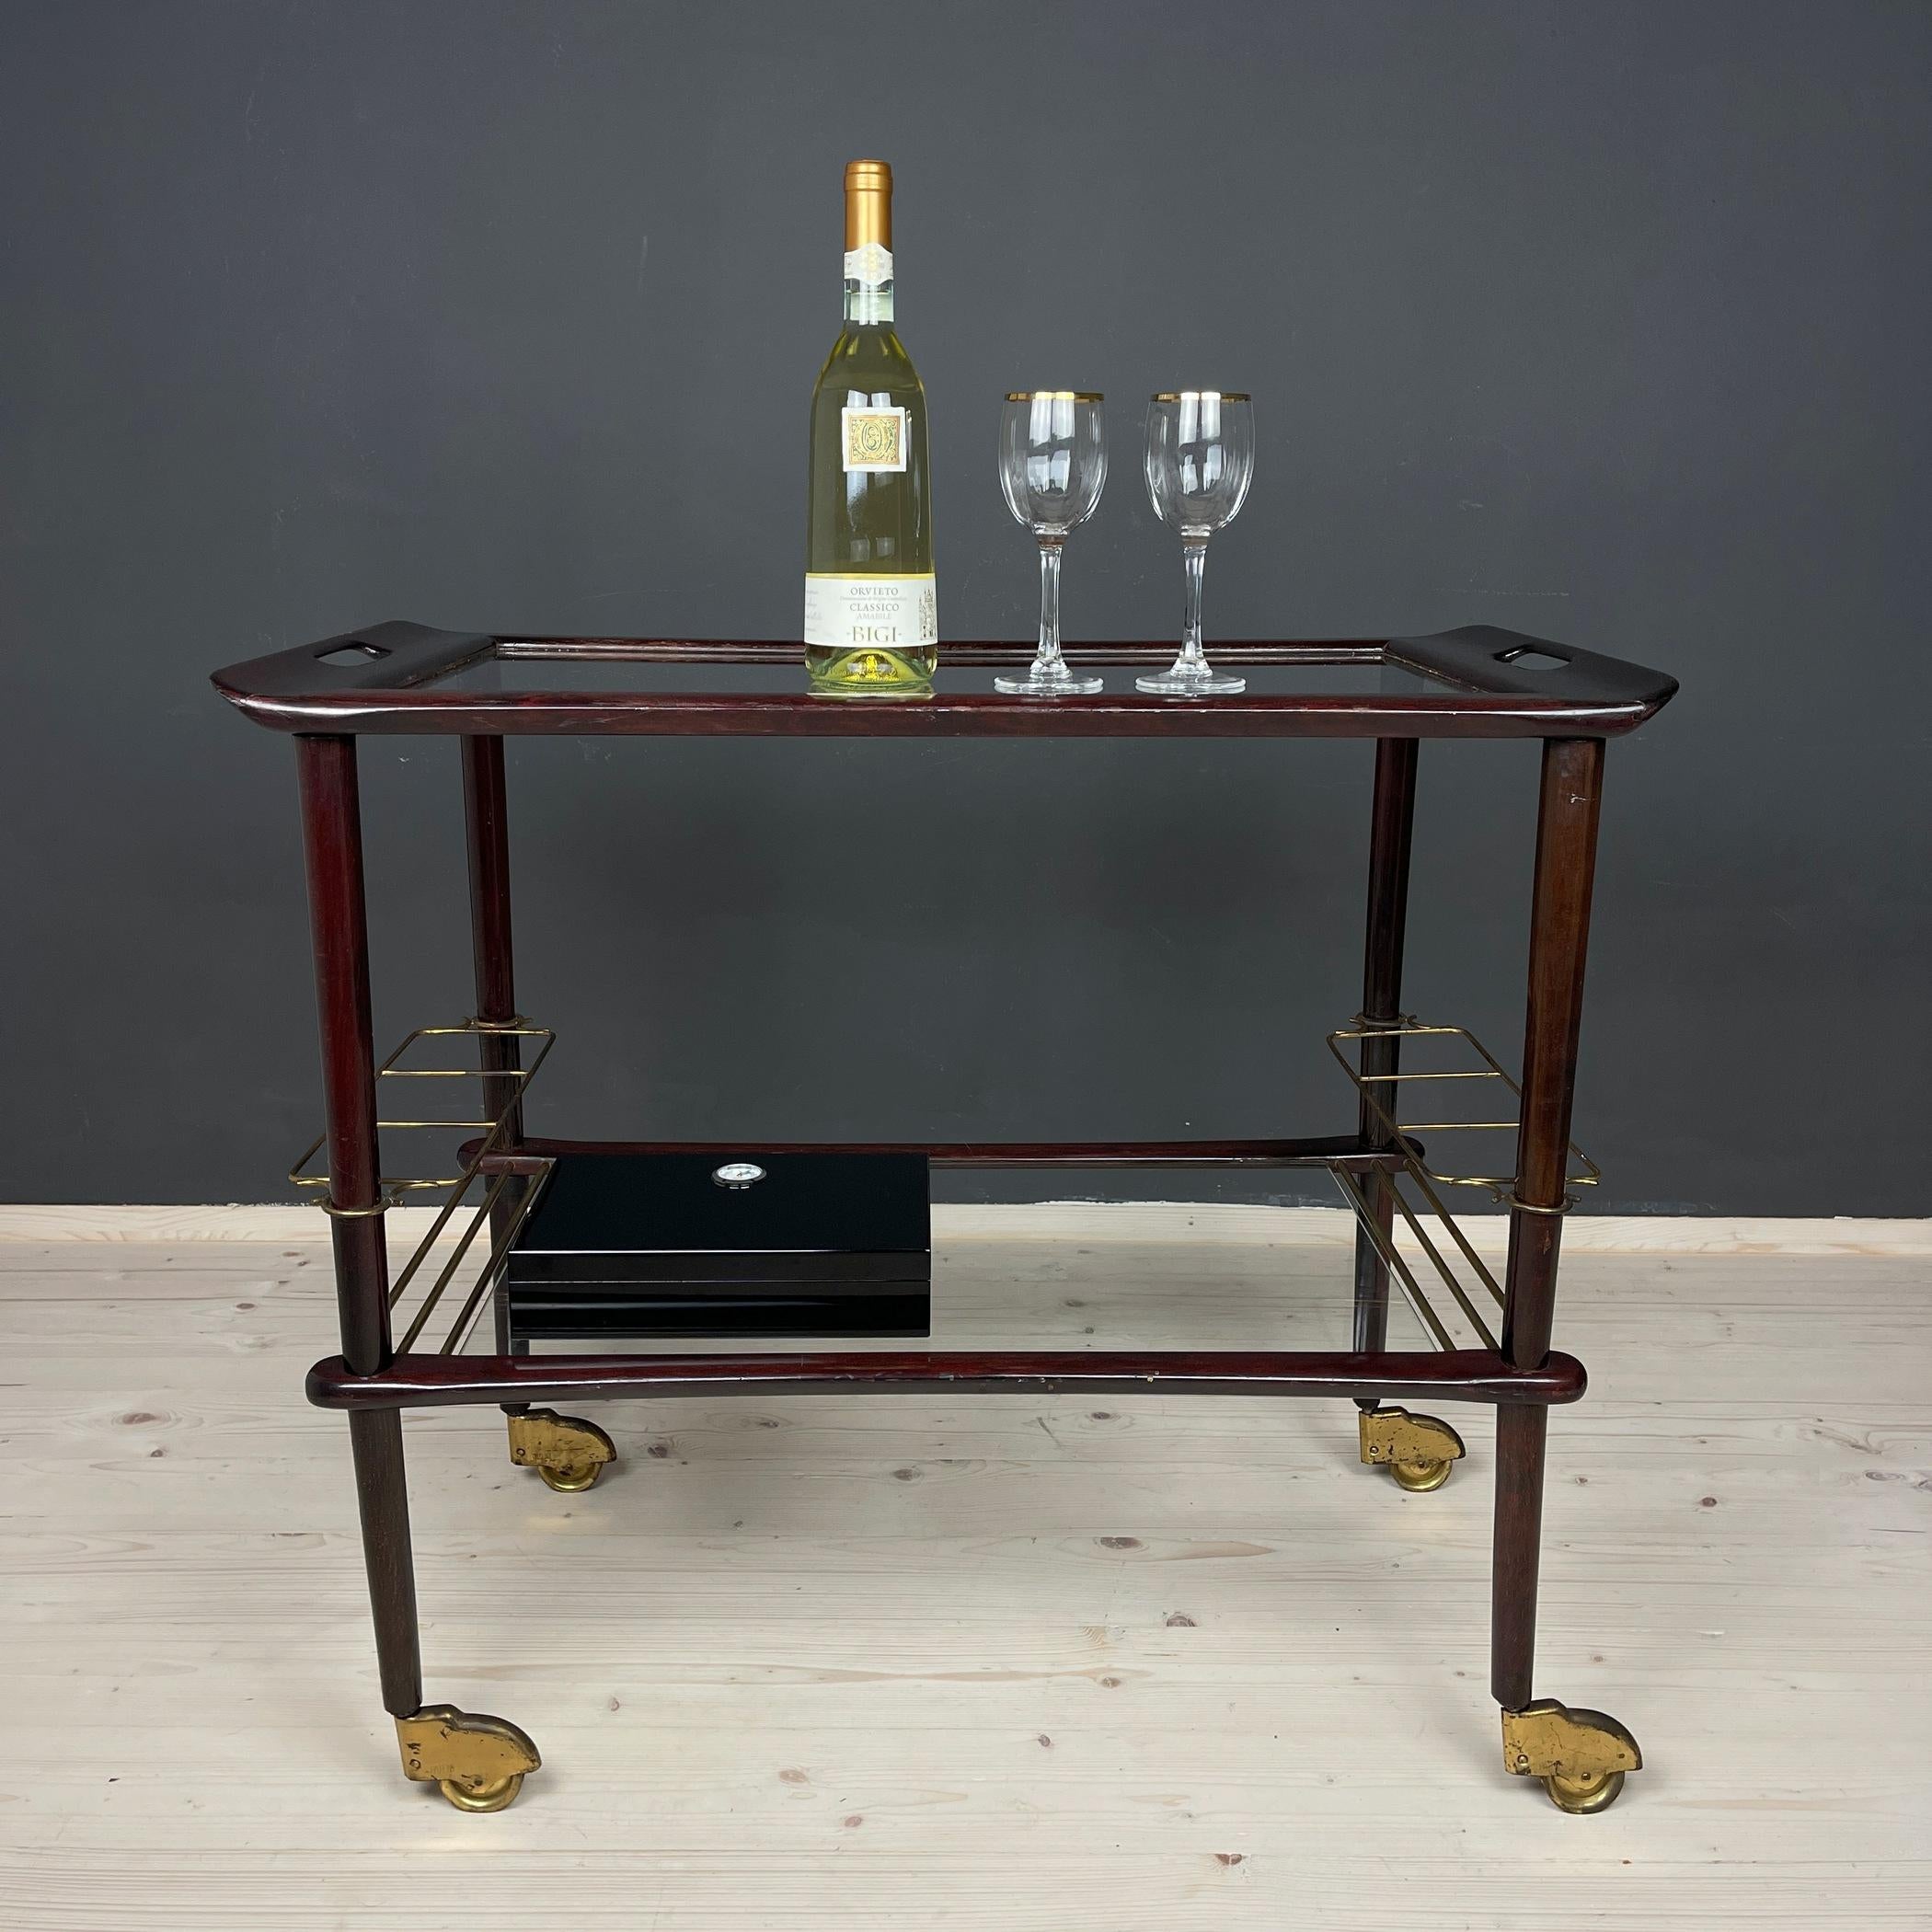 Indulge in the elegance of Italian design with this exquisite wooden trolley, a creation by renowned Italian designer Ico Parisi for De Baggis in the 1960s. Adorned with graceful rounded lines, this piece embodies the quintessence of mid-century